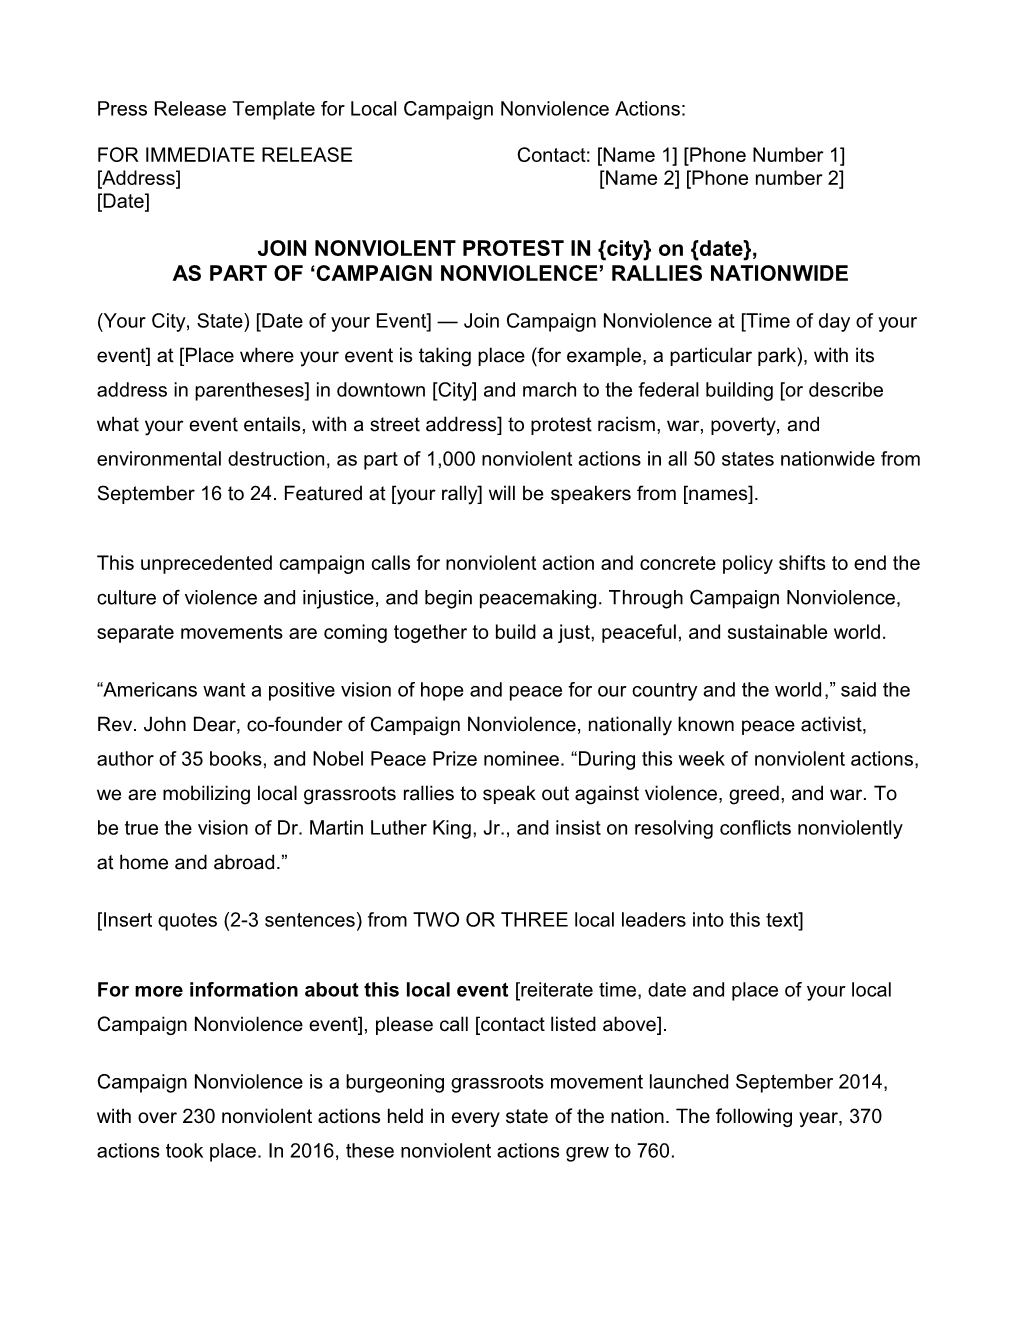 Press Release Template for Local Campaign Nonviolence Actions